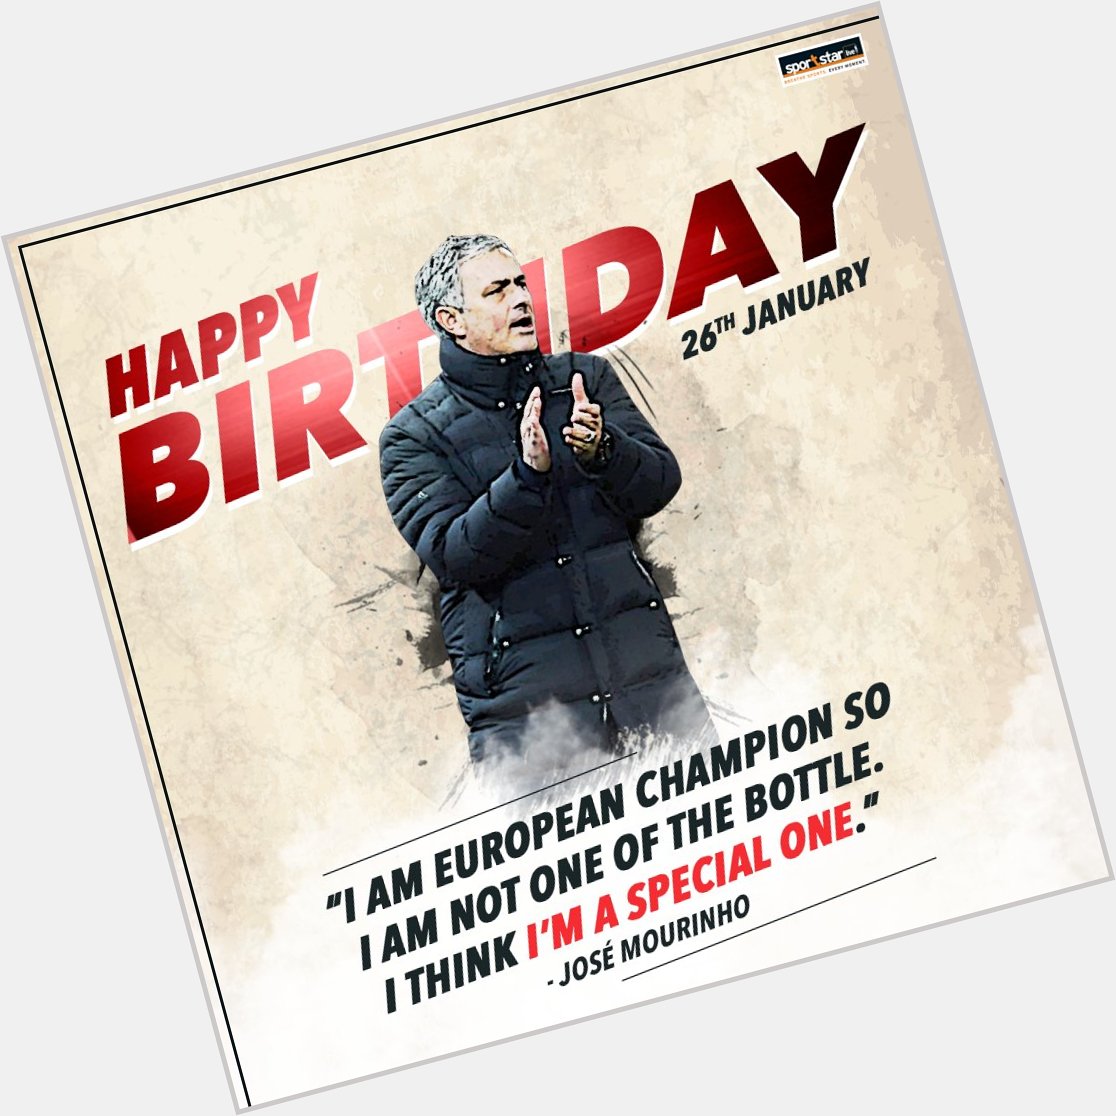 Join us in wishing a very happy birthday to one of the most successful managers of his generation, José 